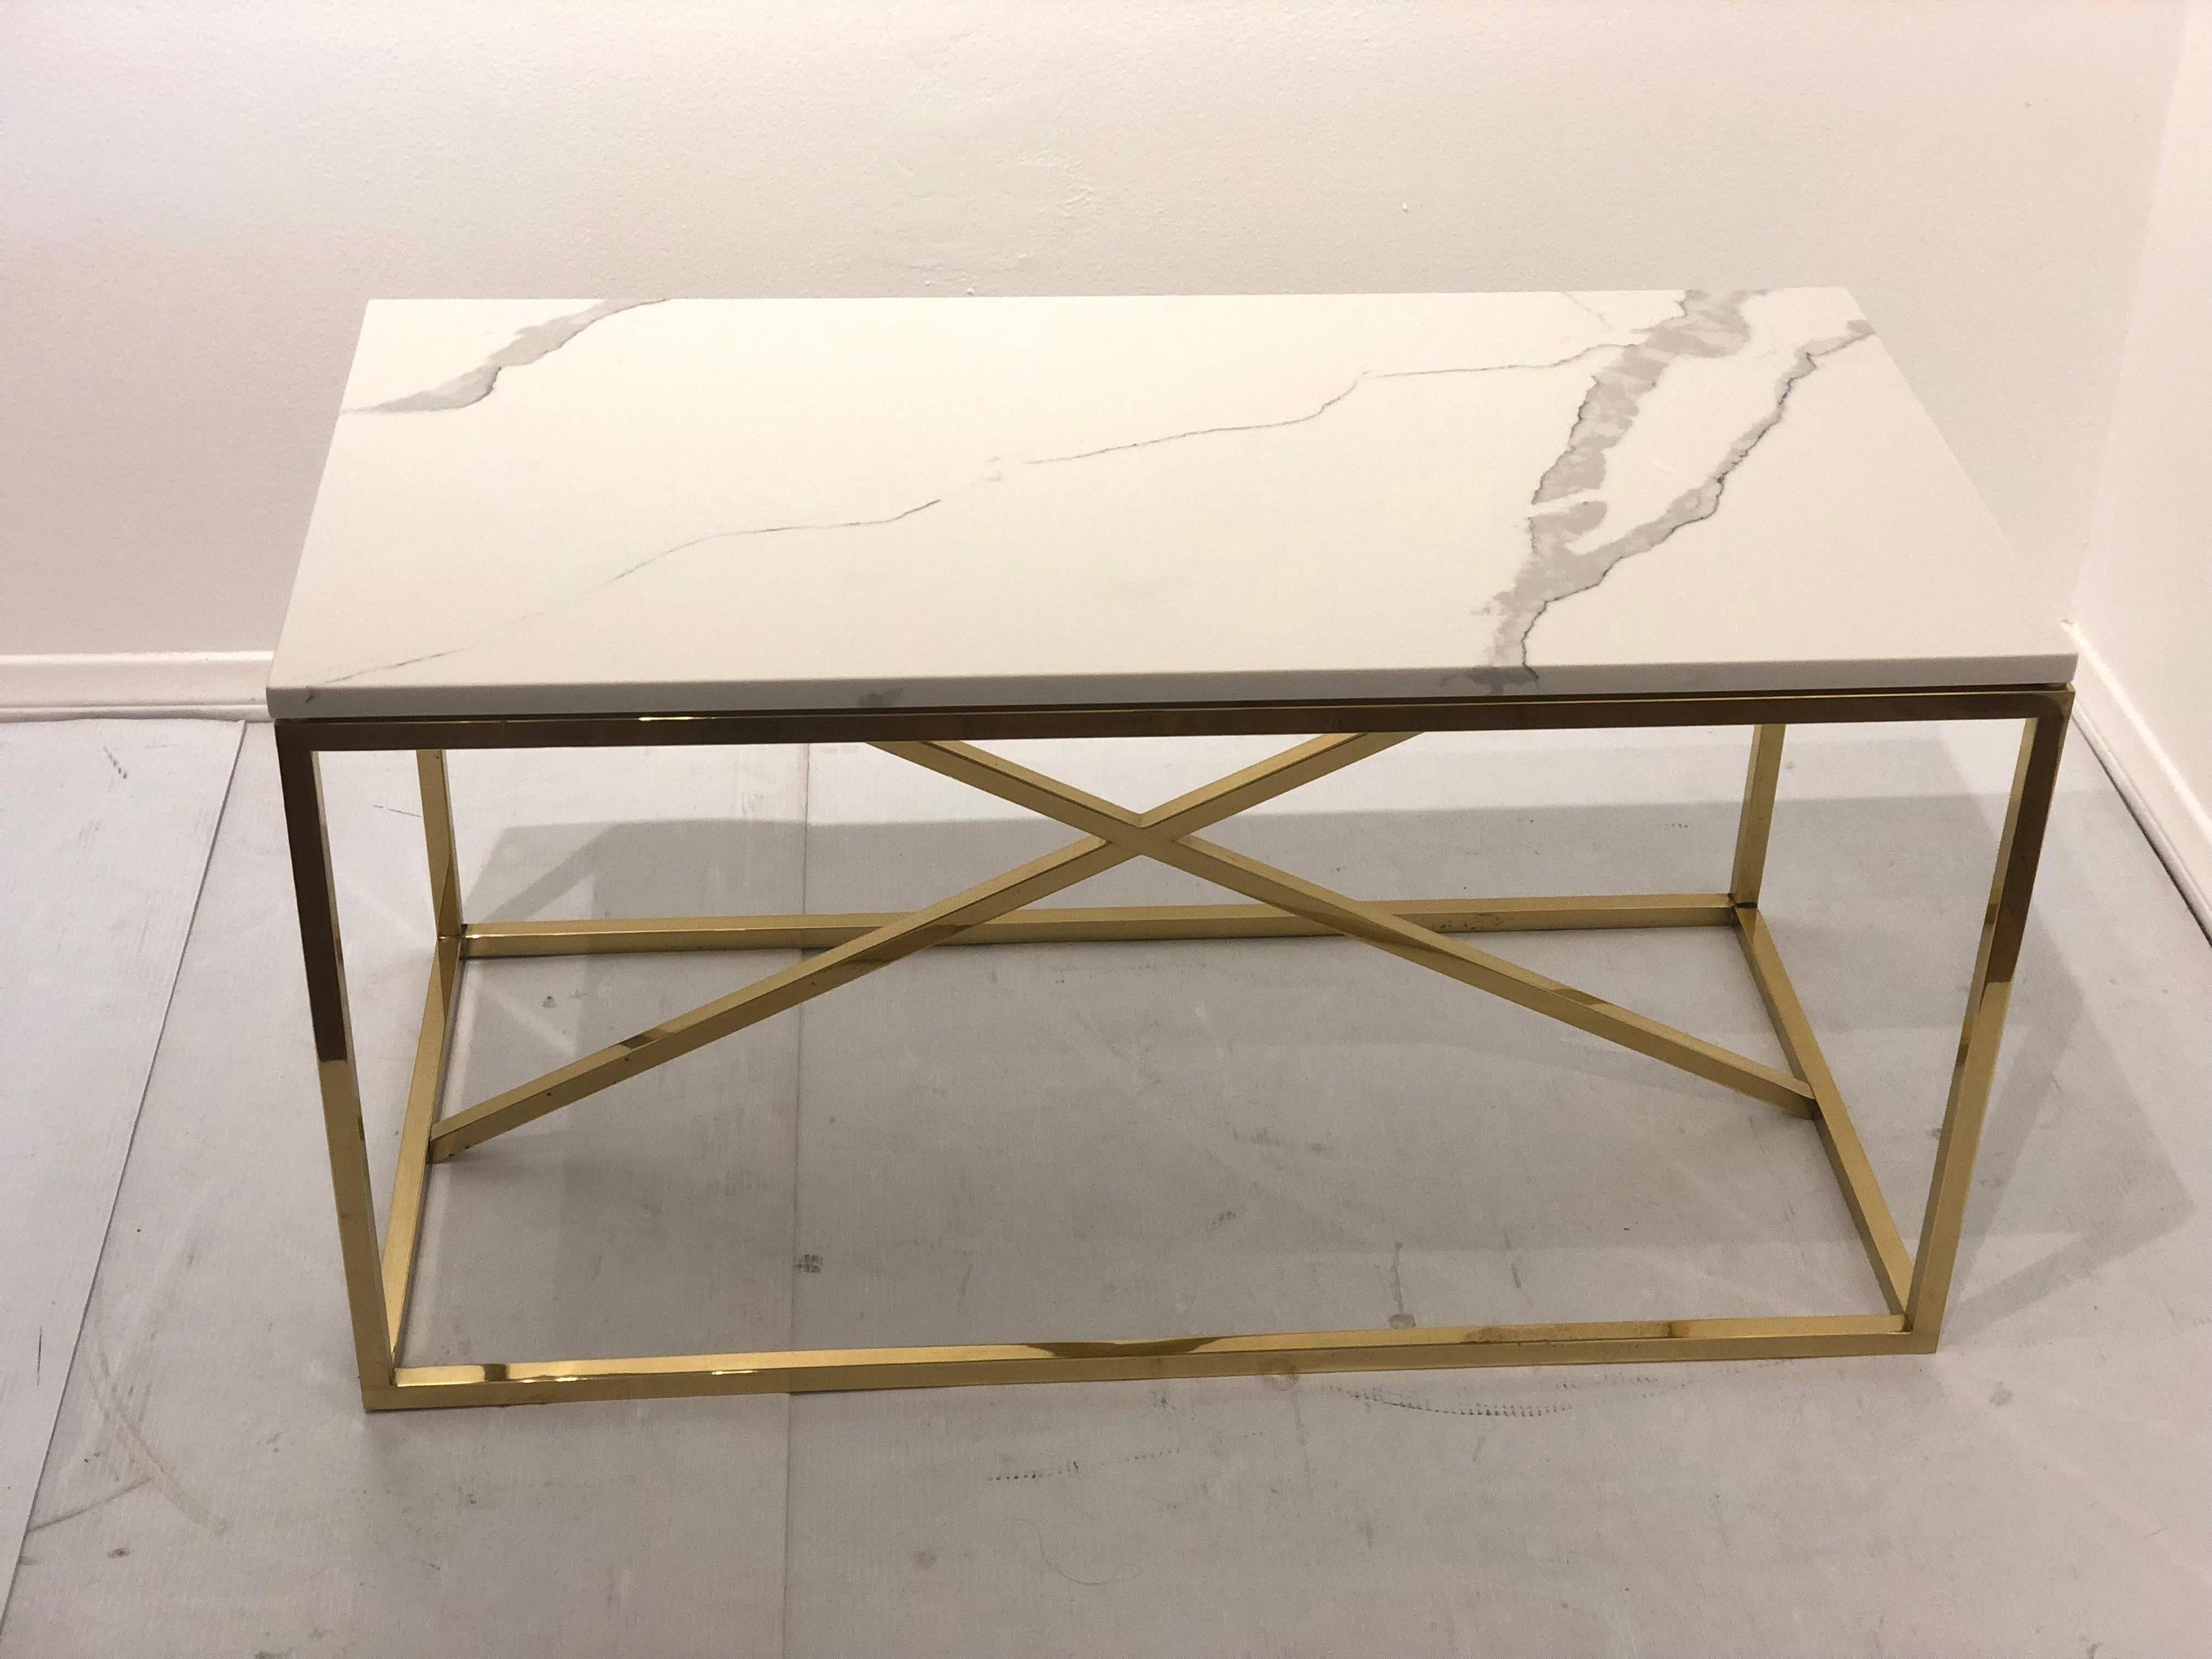 20th Century Striking Polished Brass and Marble Coffee Table x Base